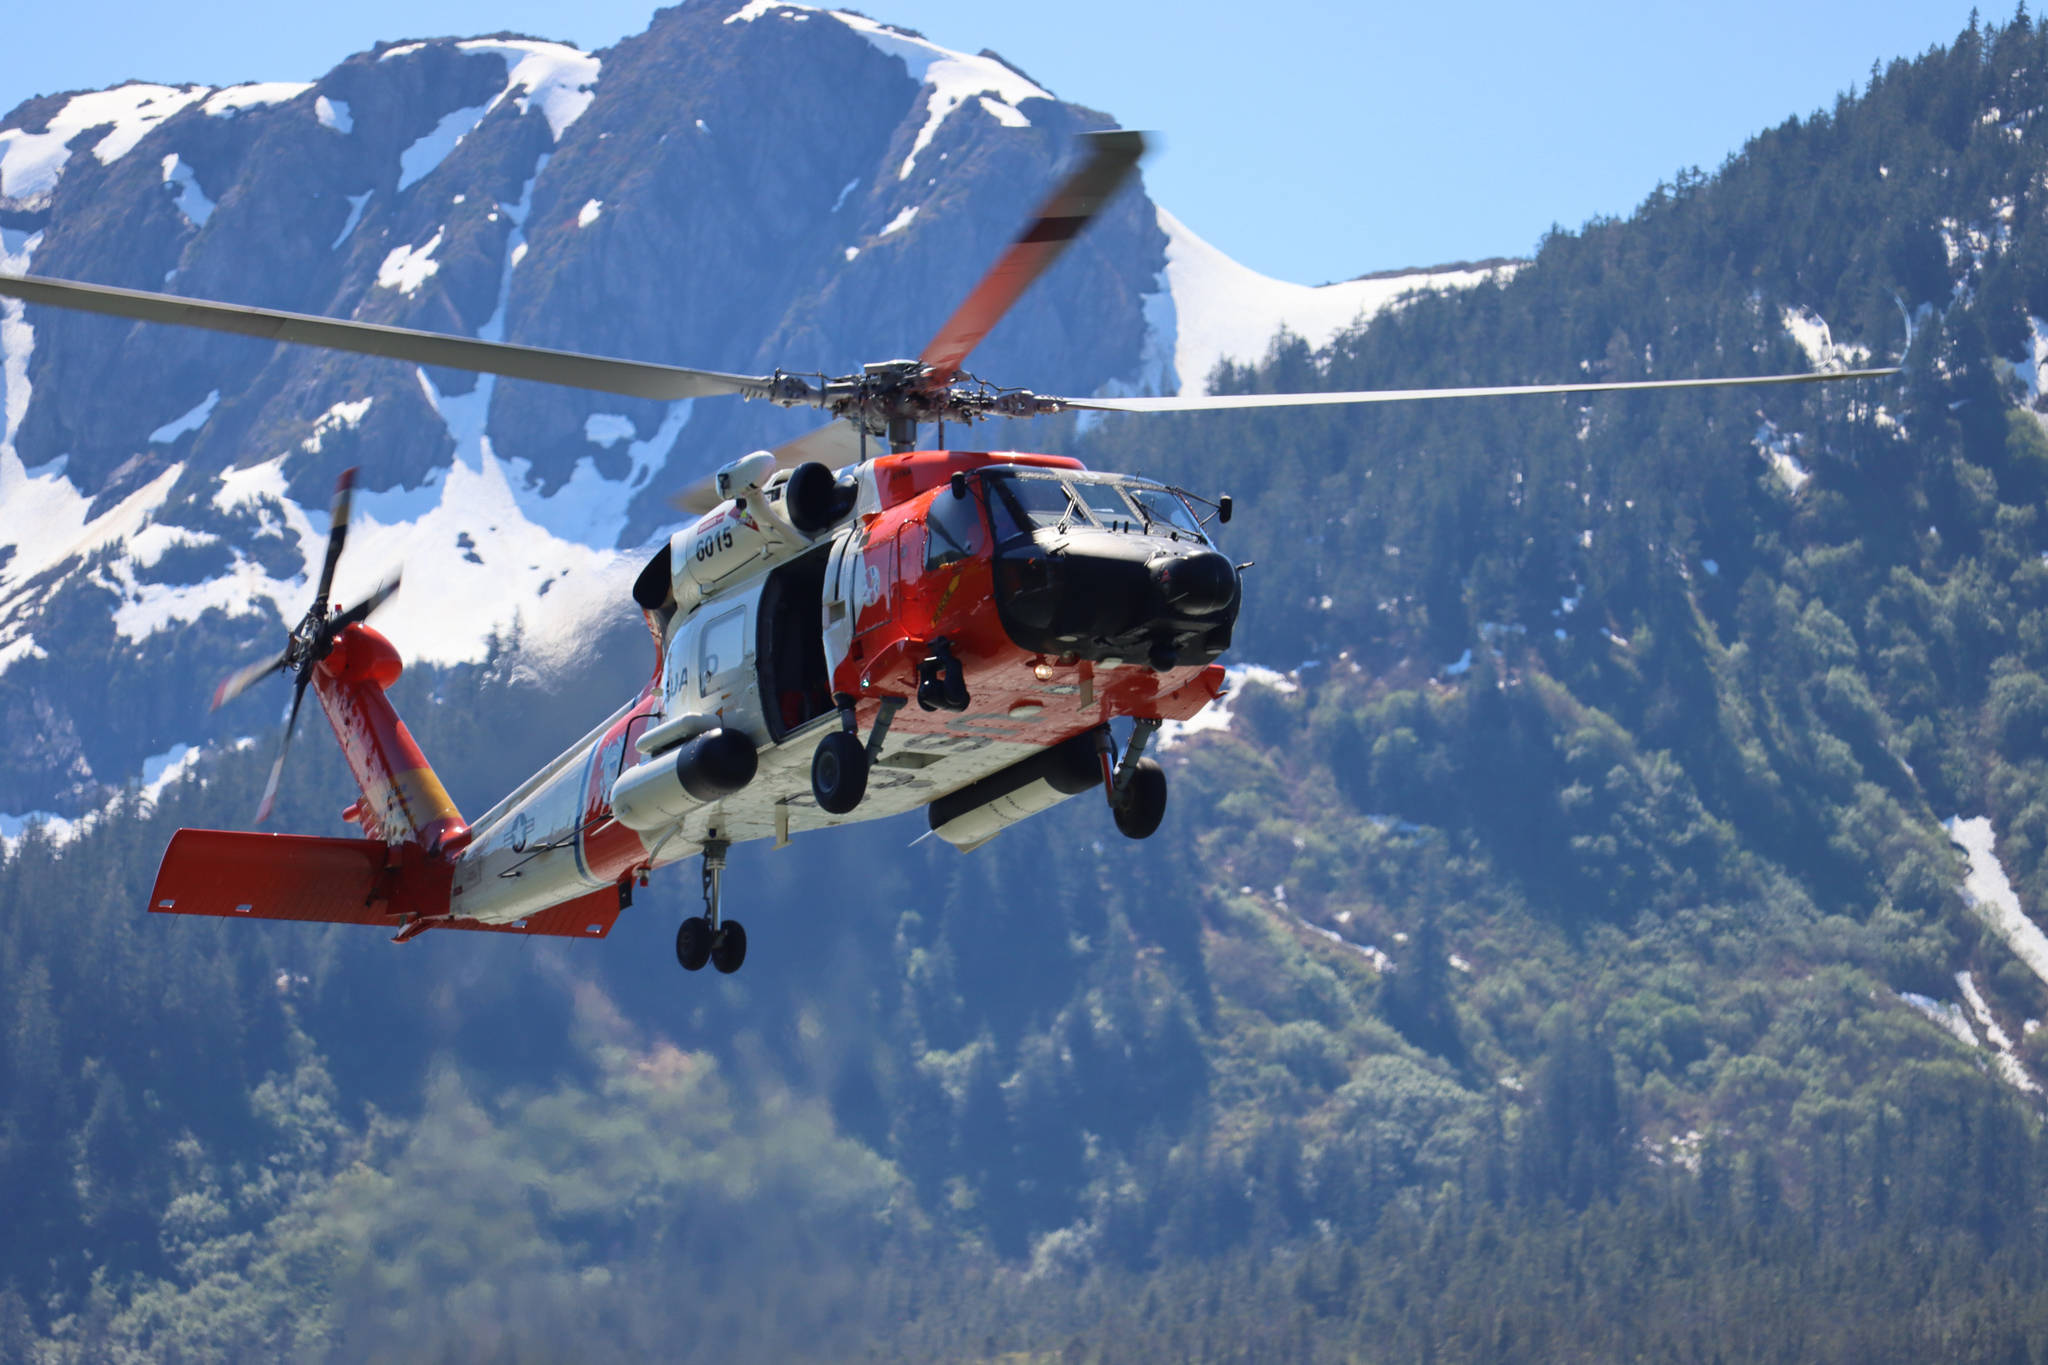 A Coast Guard helicopter demonstrates a water rescue during Juneau’s Maritime Festival. The Coast Guard is investigating a series of three vessels sinking across Southeast Alaska within an approximately twelve-hour period in late June. (Ben Hohenstatt / Juneau Empire File)